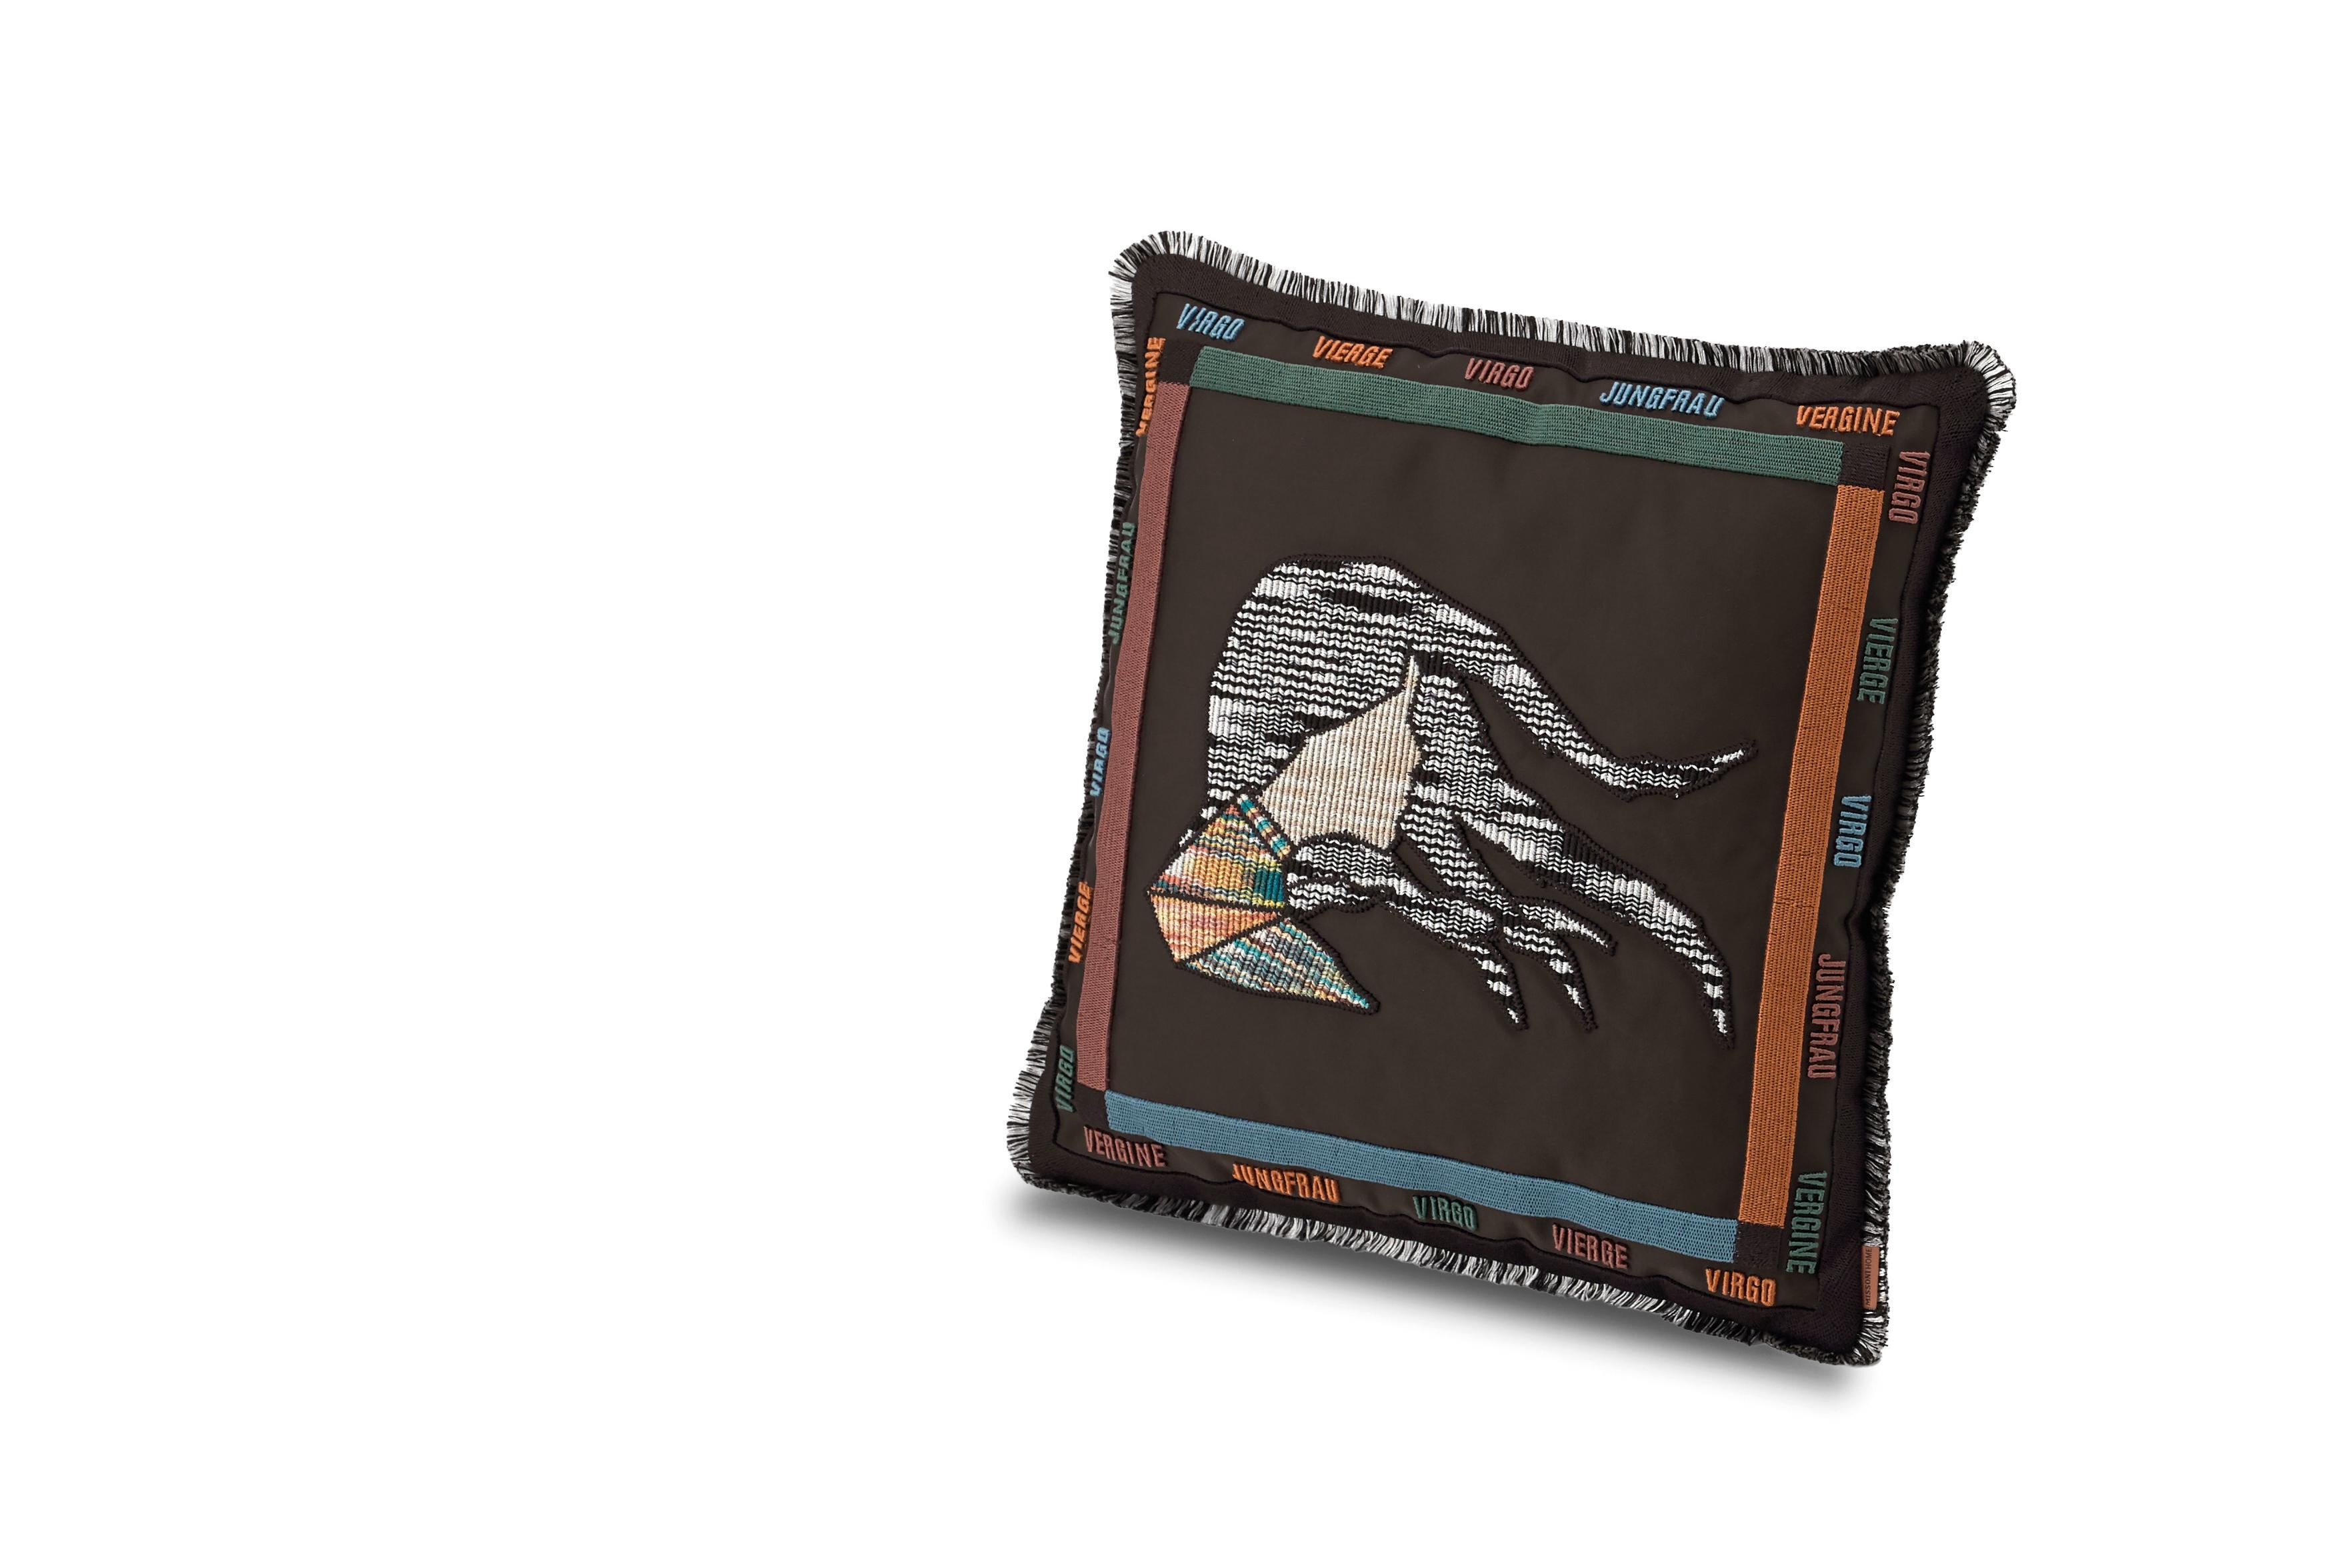 Missoni Home's embroidered constellation cushion featuring the Virgo zodiac symbol with removeable cover; Down insert (certified as responsibly souced down)
